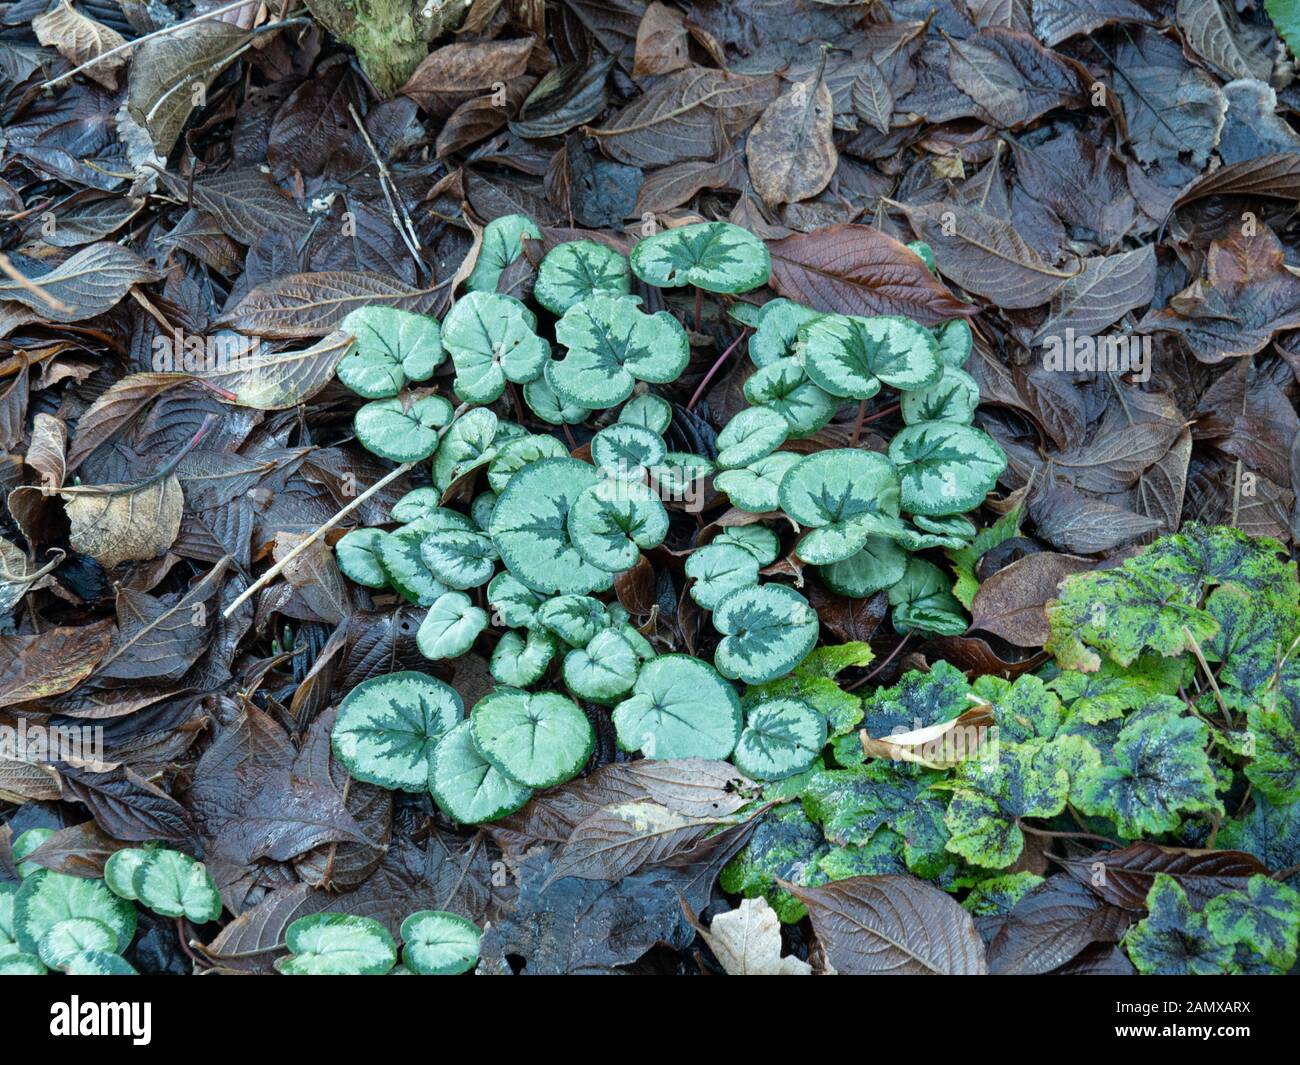 The fresh green and silver leaves of Cyclamen coum providing winter interest against a background of fallen leaves Stock Photo